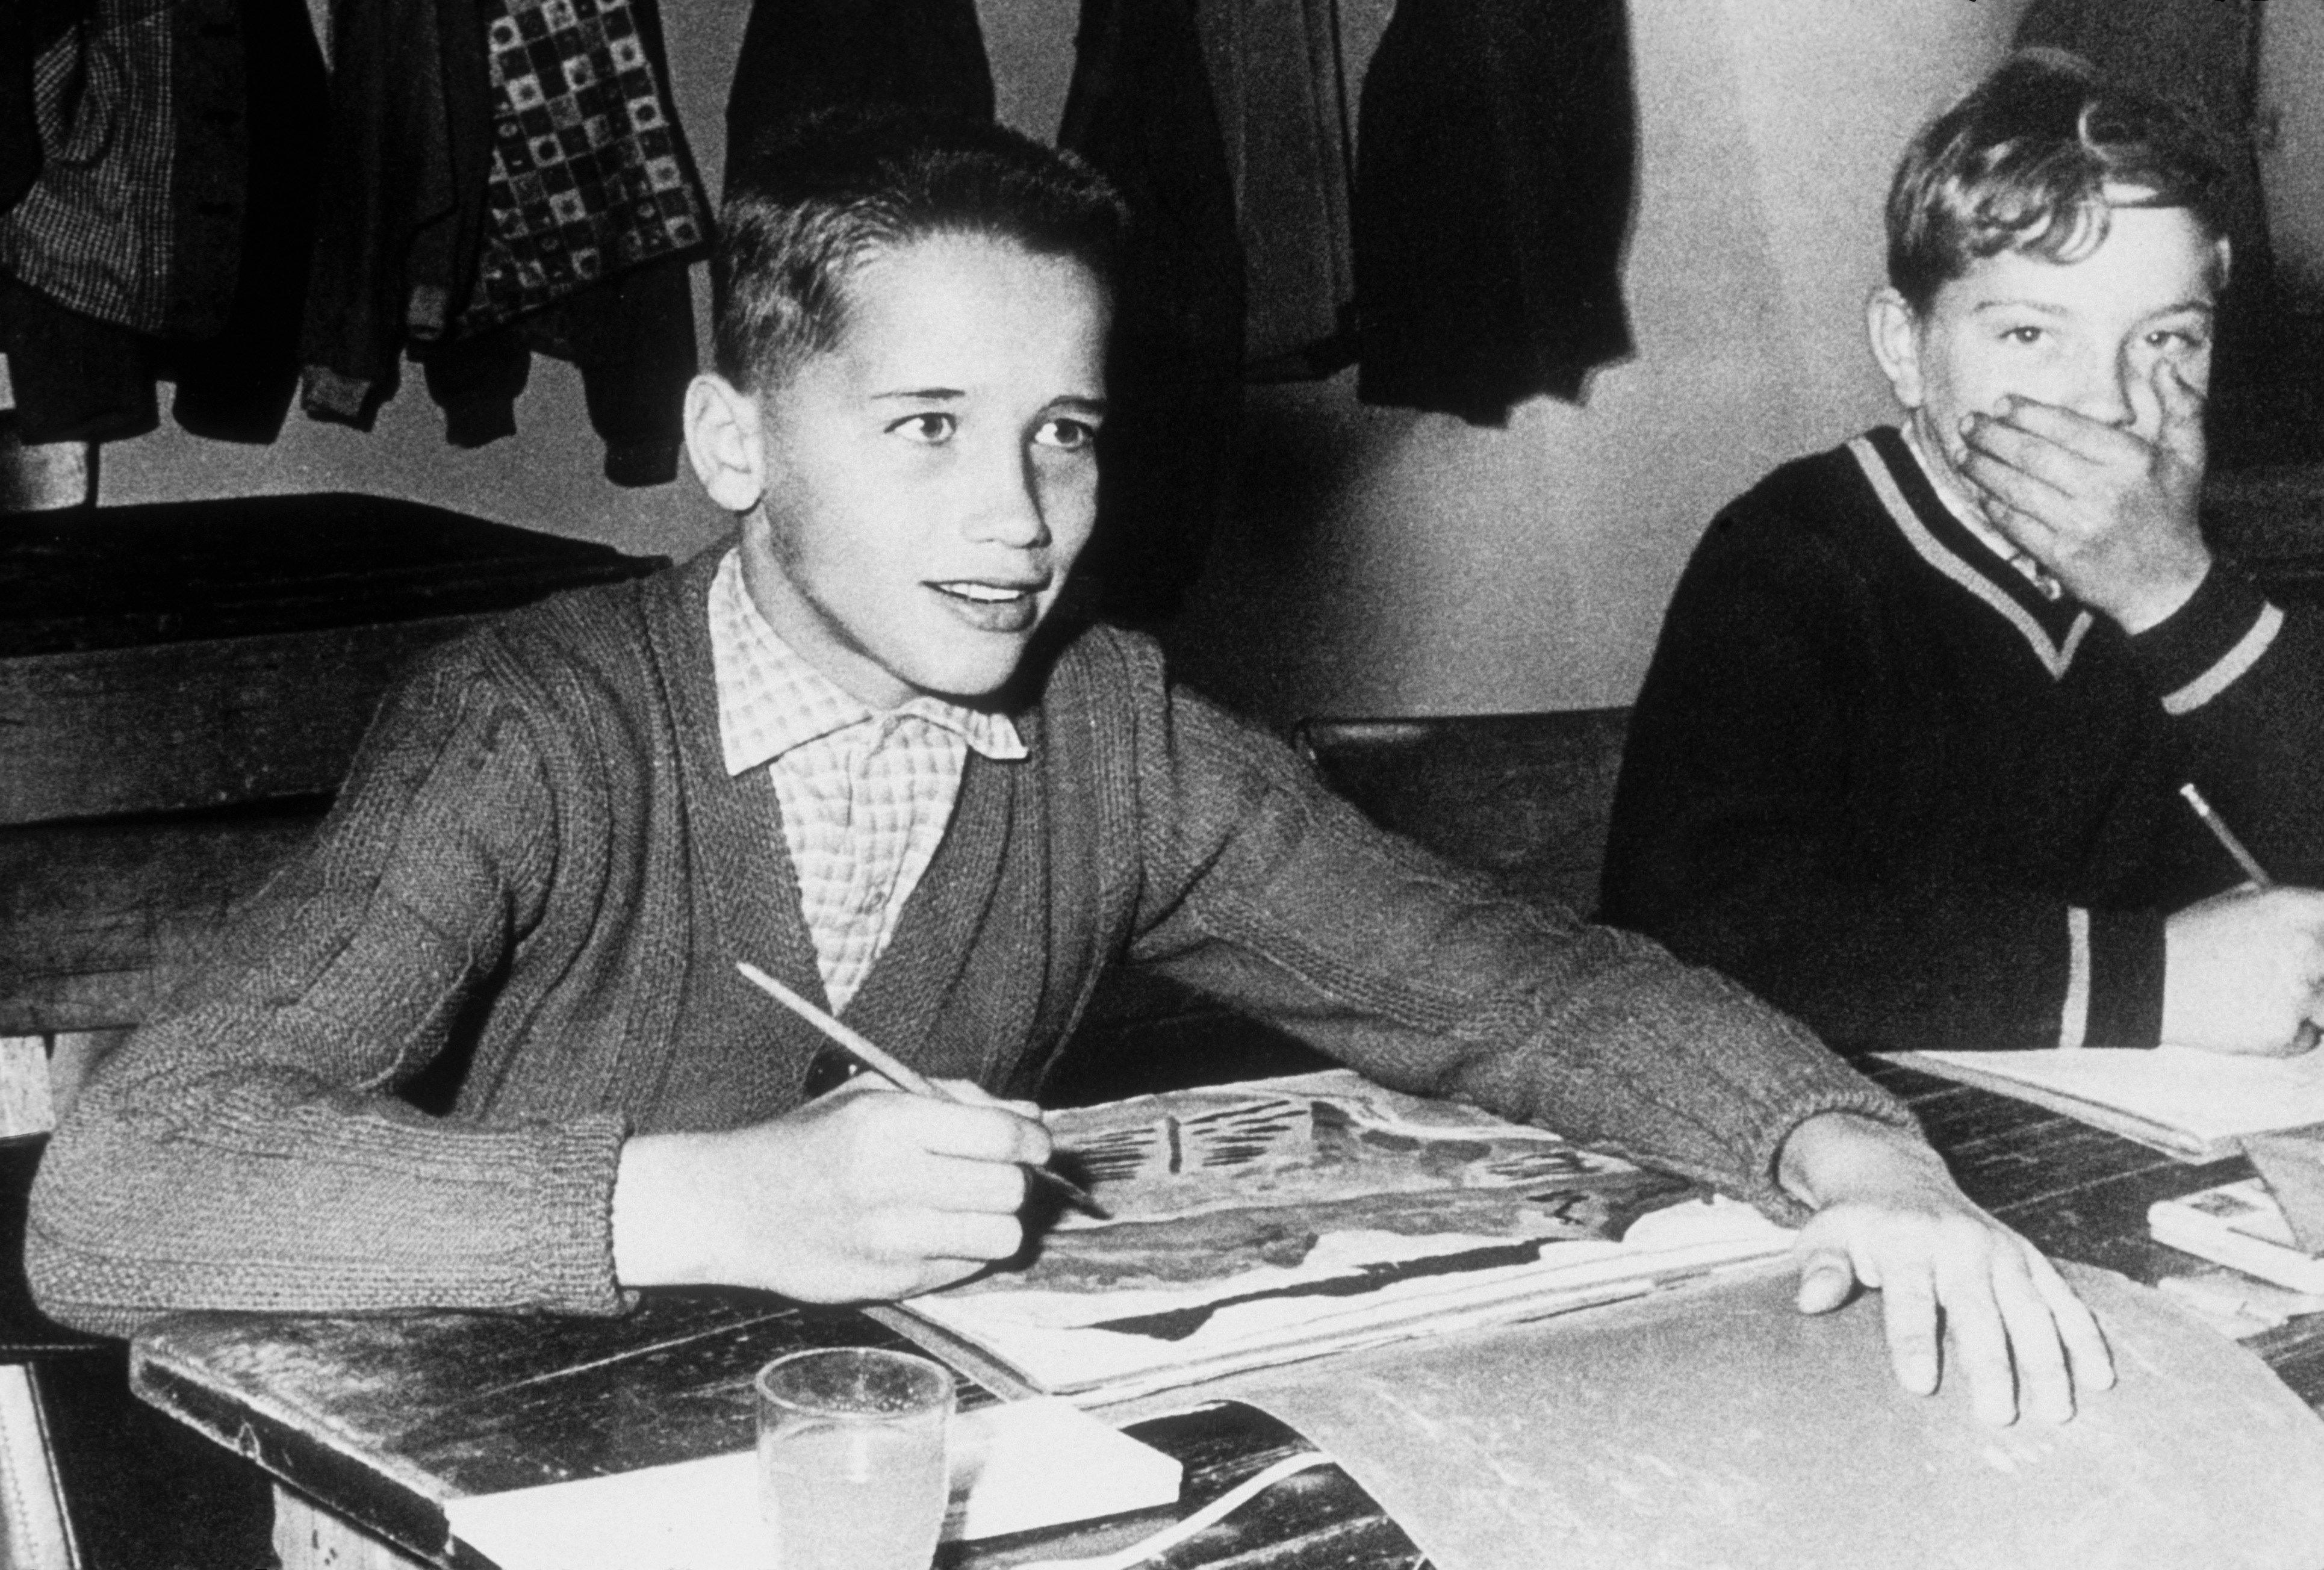 Arnold Schwarzenegger, 11, and another student pose for a photo in art class in 1958 in Thal, Austria | Source: Getty Images